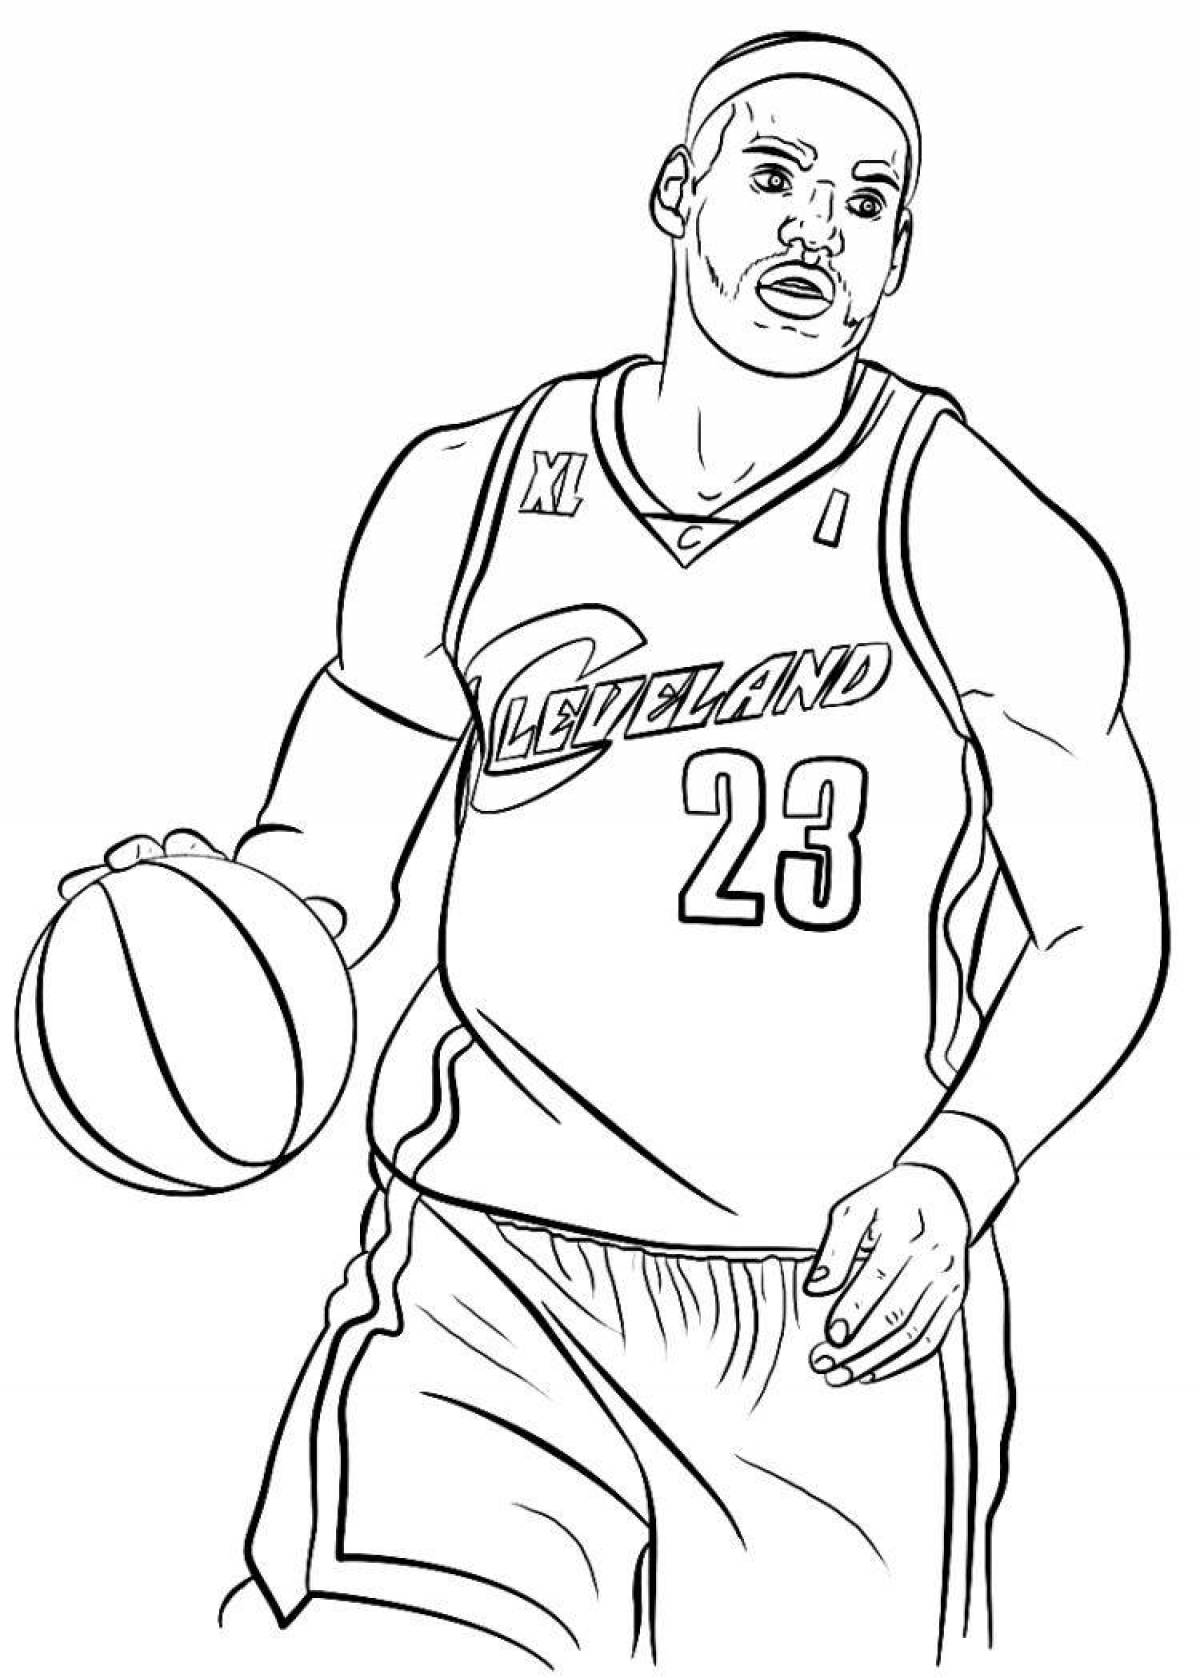 Animated dynamo coloring page